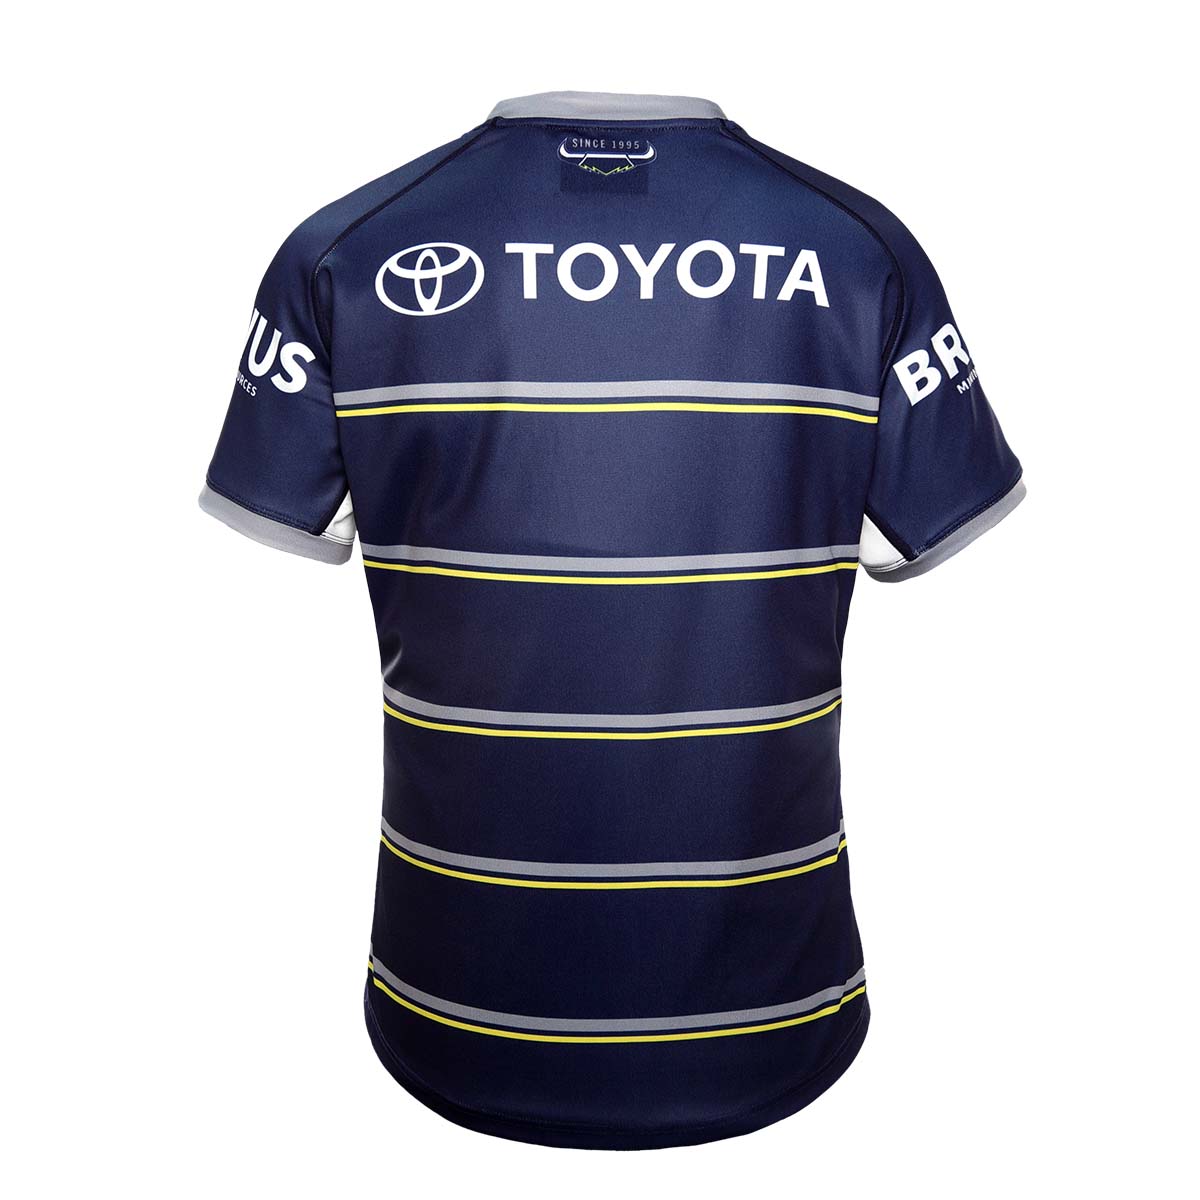 Cowboys Home Jersey 22 - The Rugby Shop Darwin